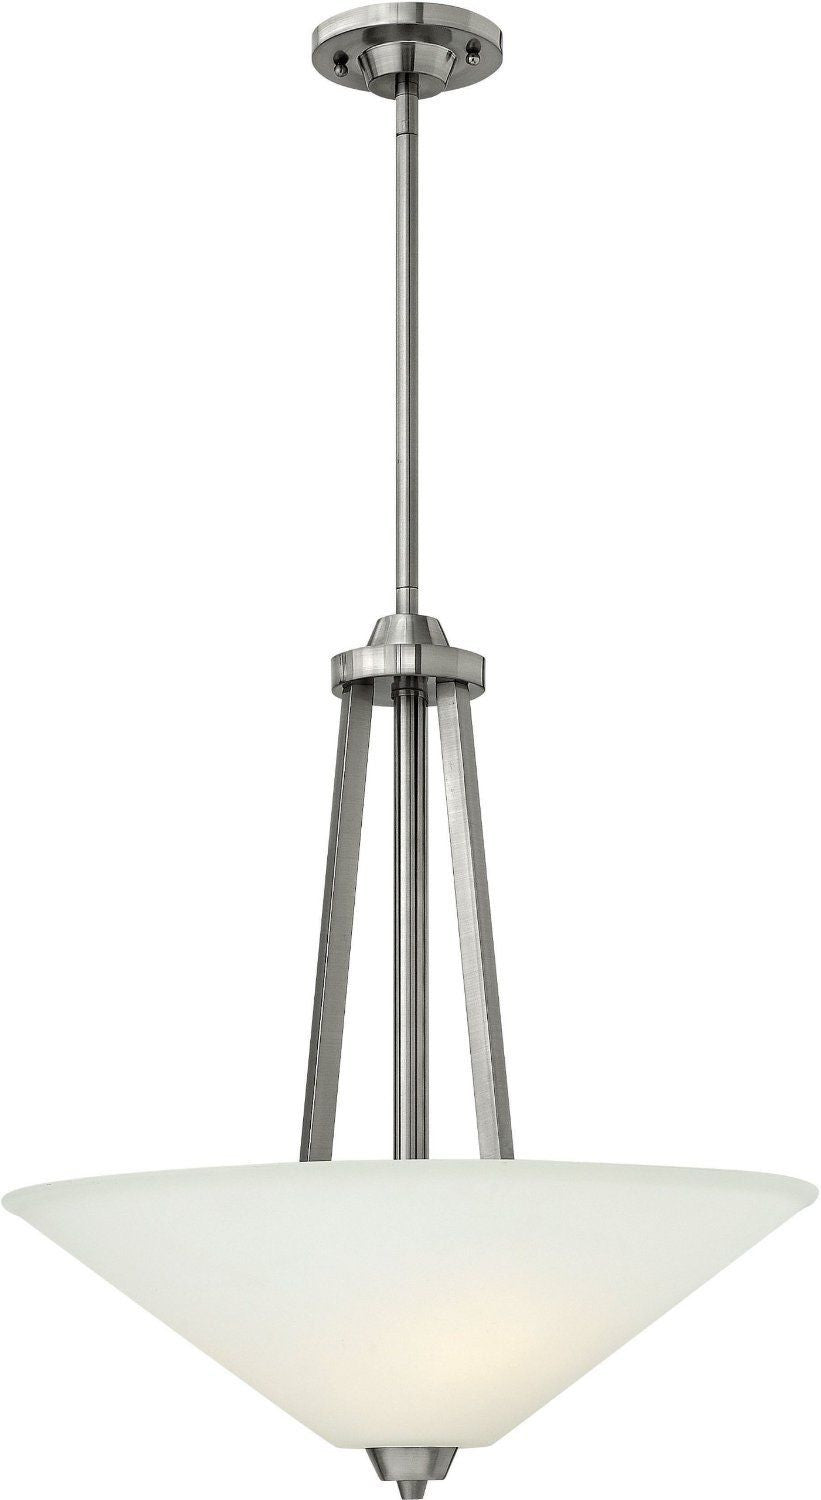 Hinkley Lighting 3664 BN Dillon Collection Three Light Hanging Pendant Chandelier in Brushed Nickel Finish